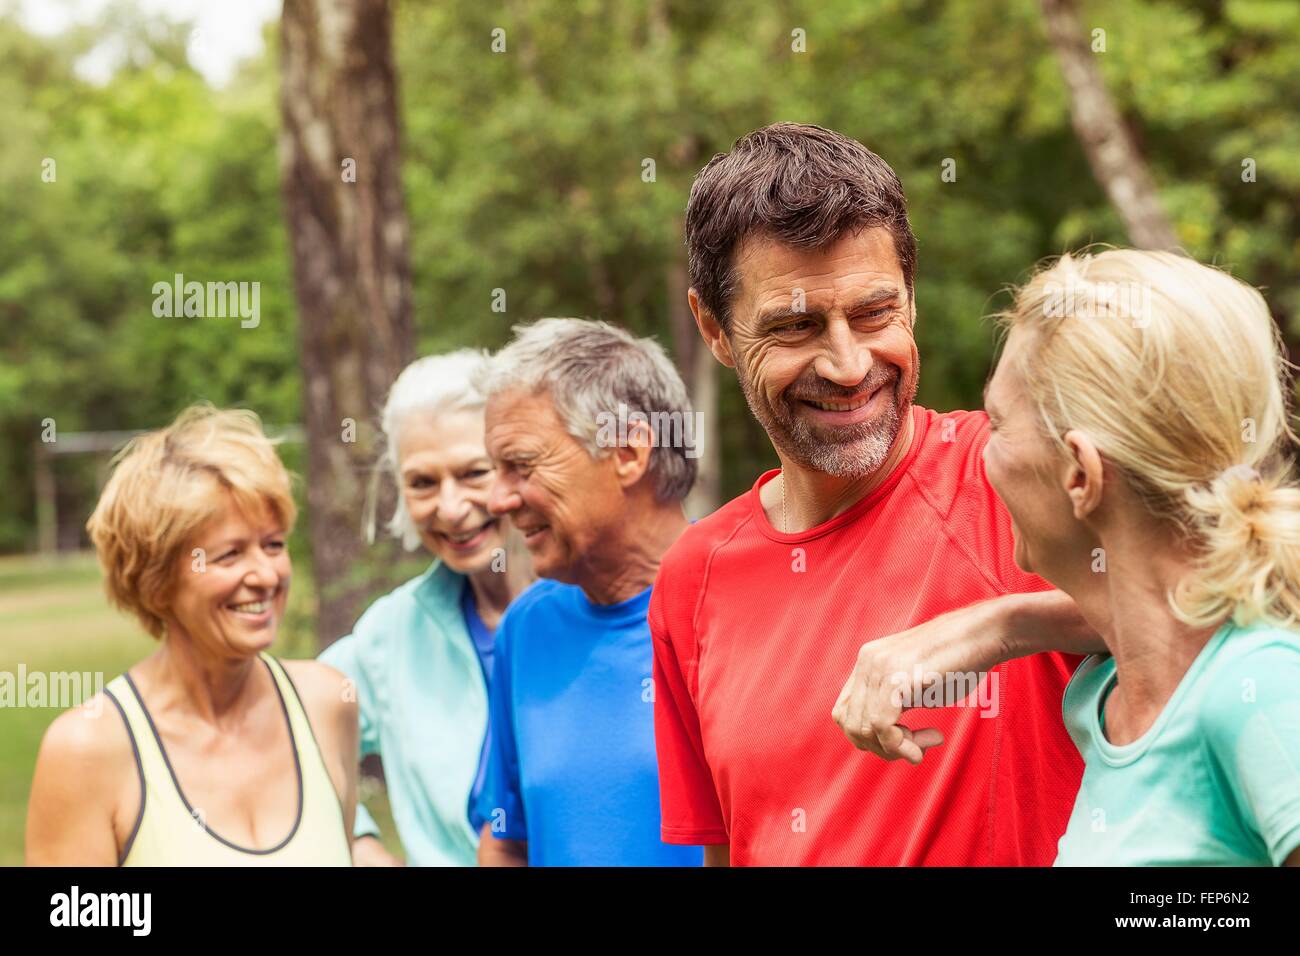 Group of adults outdoors, wearing sports clothing, smiling Stock Photo